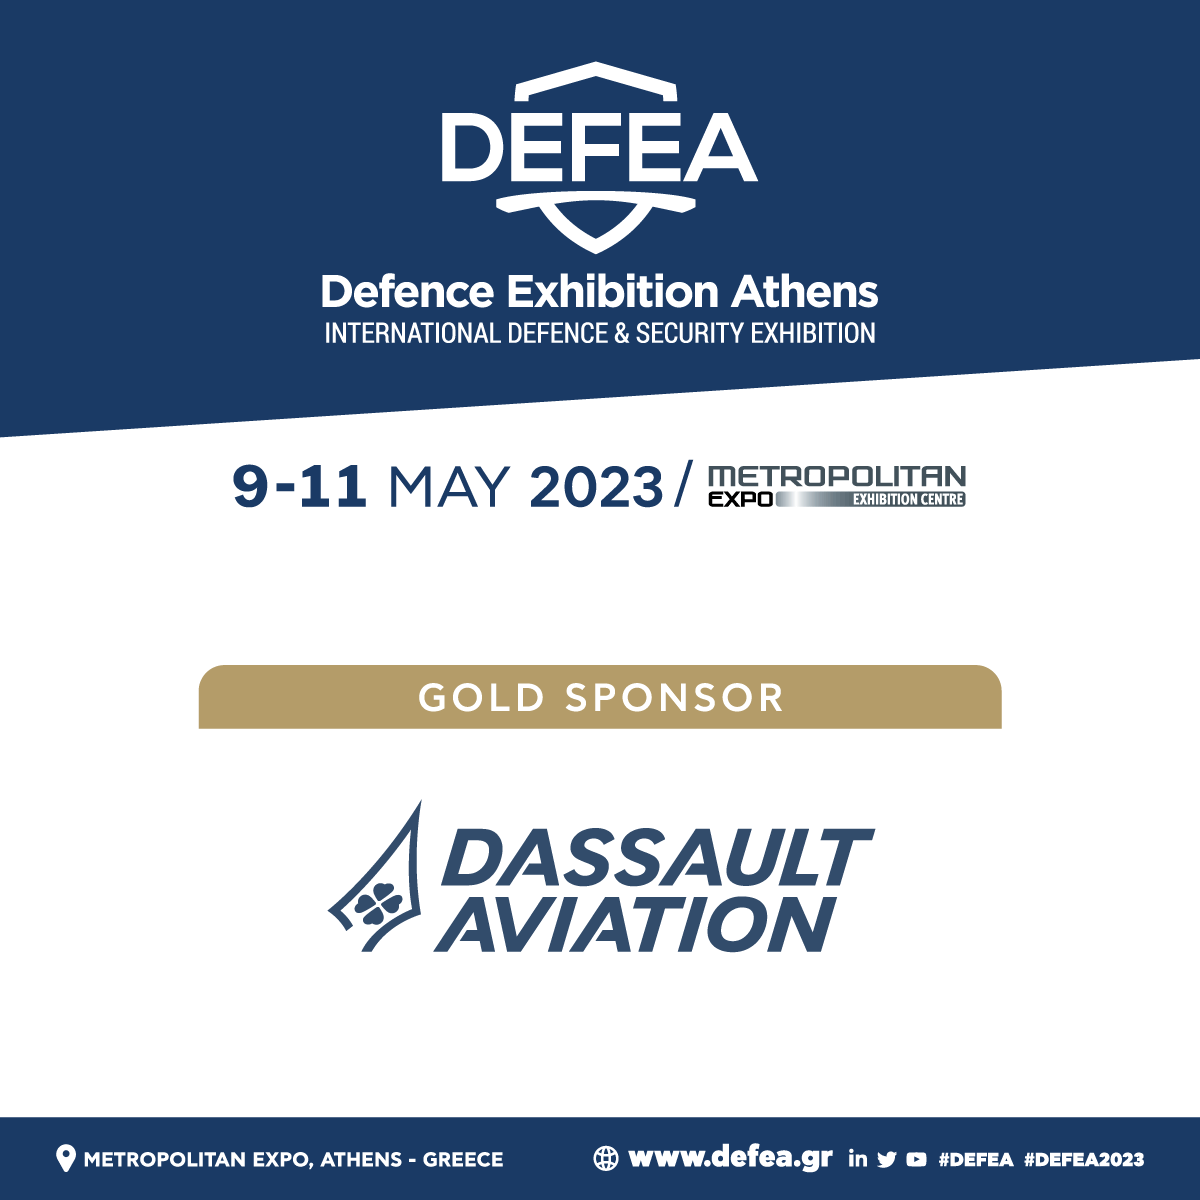 DEFEA - Defence Exhibition Athens proudly announces that DASSAULT AVIATION has been confirmed as the GOLD SPONSOR of the event.

Register as a visitor: defea.gr/visitors/pre-r…
Book your stand: bit.ly/3JzCNPr

#defea #defea2023 #dassaultaviation #sponsor #defence #defense